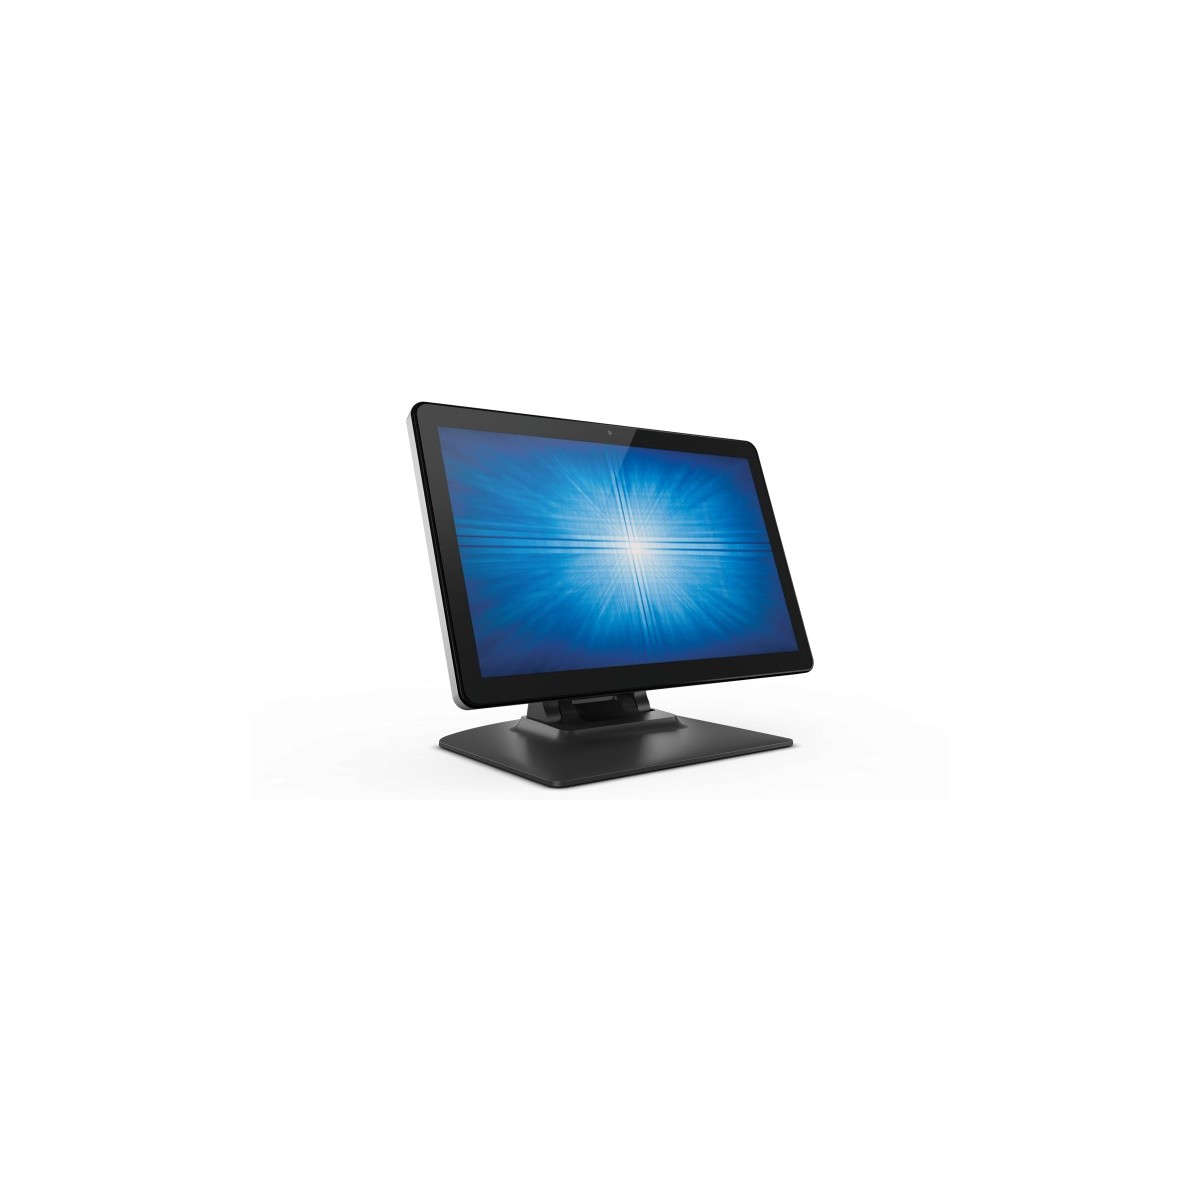 Elo Touch Solutions Elo Touch Solution E160104 - Multimedia stand - Black - Flat panel - 25.4 cm (10) - ELO I-Series